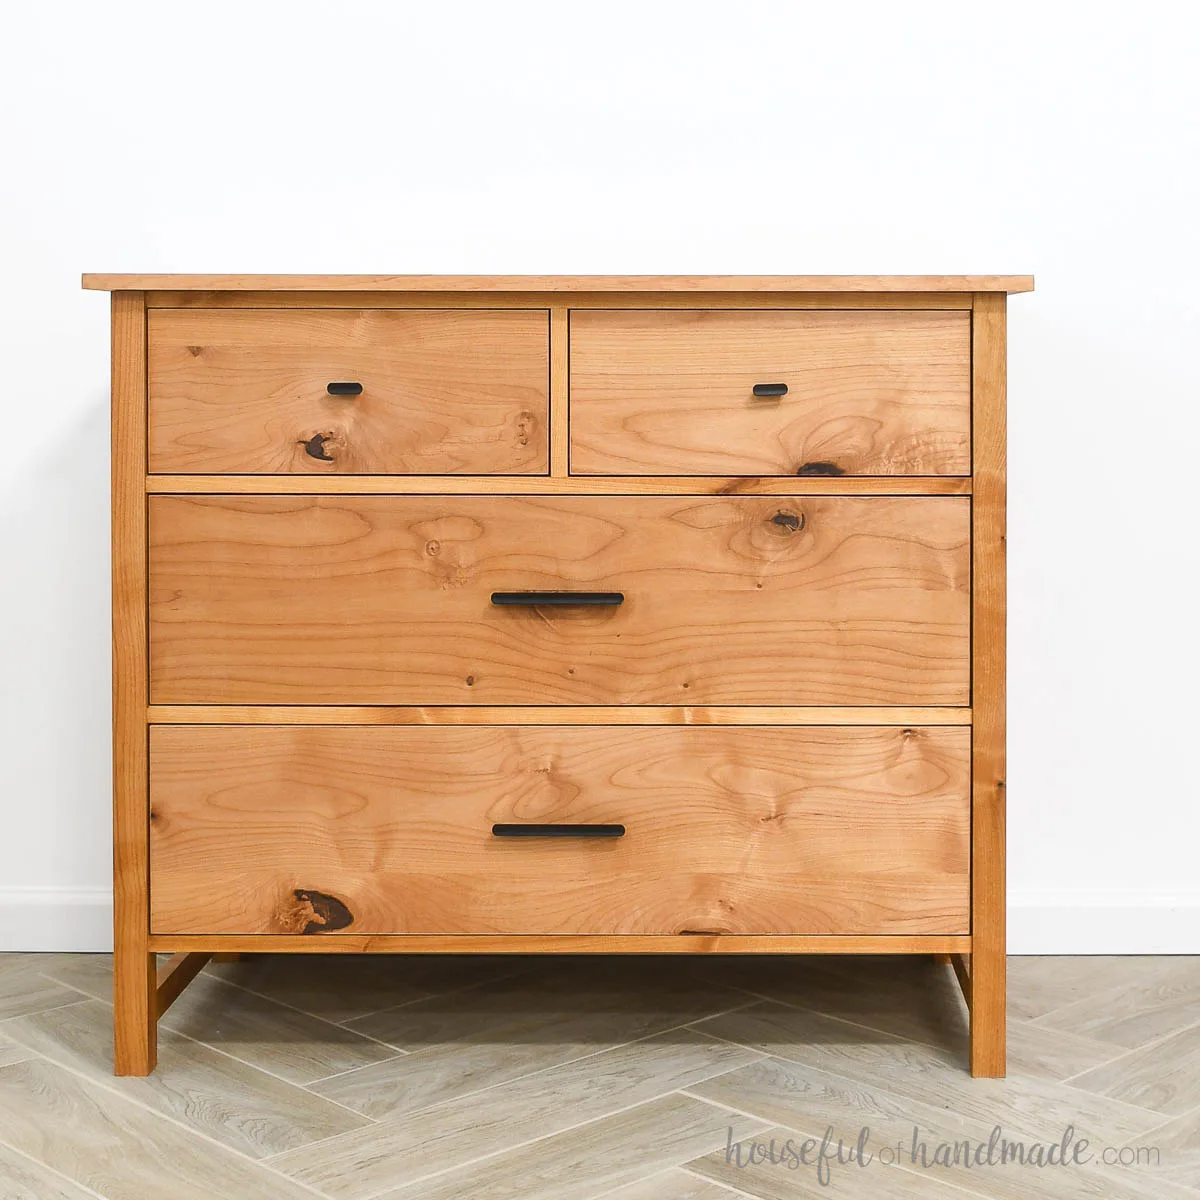 Classic 4 drawer dresser build inspired by the Pottery Barn Farmhouse dresser. 